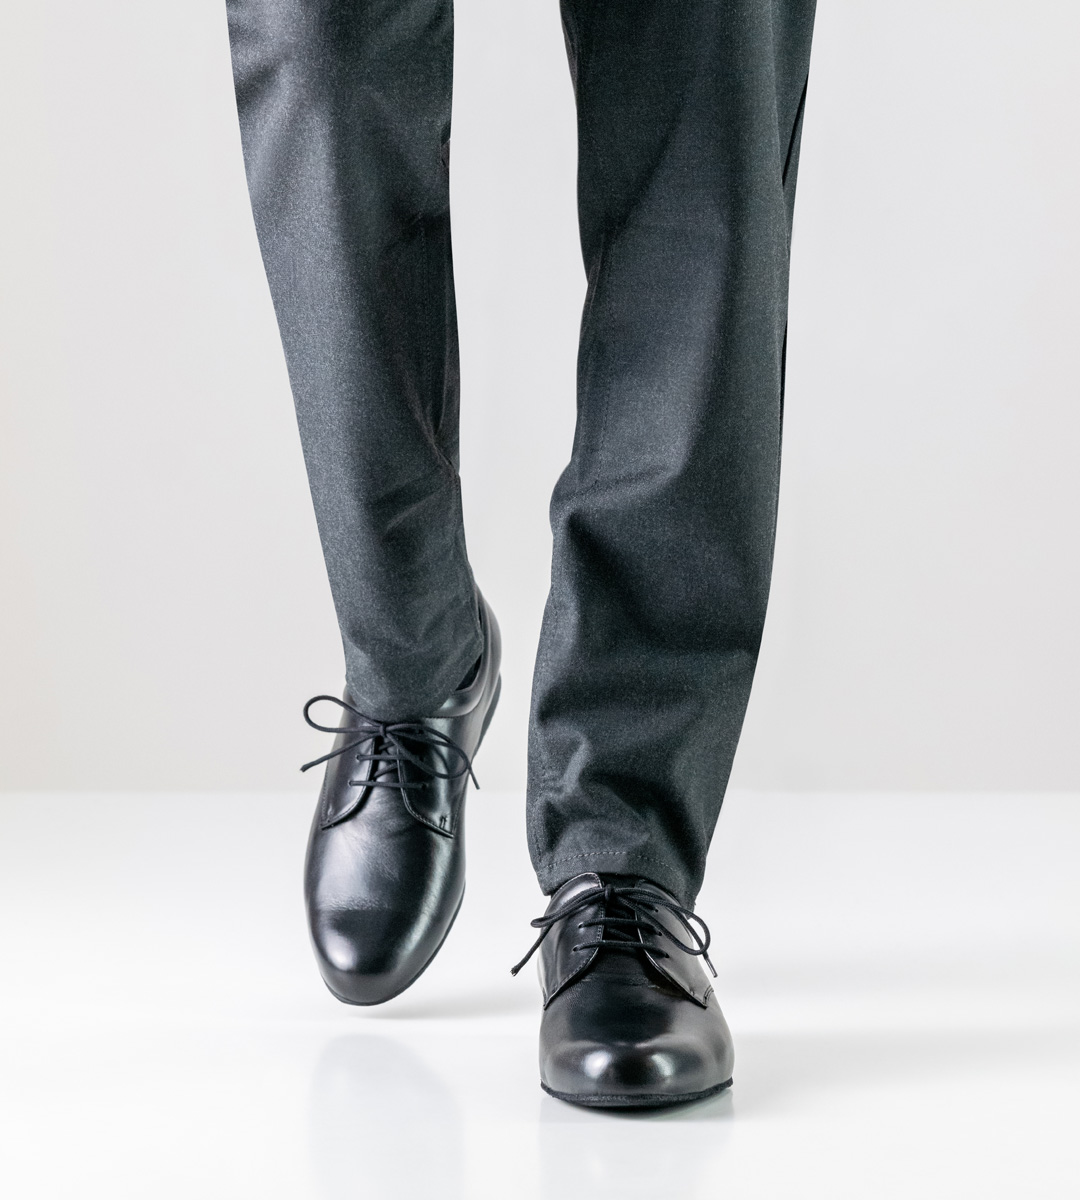 Grey trousers in combination with men's dance shoe in black leather